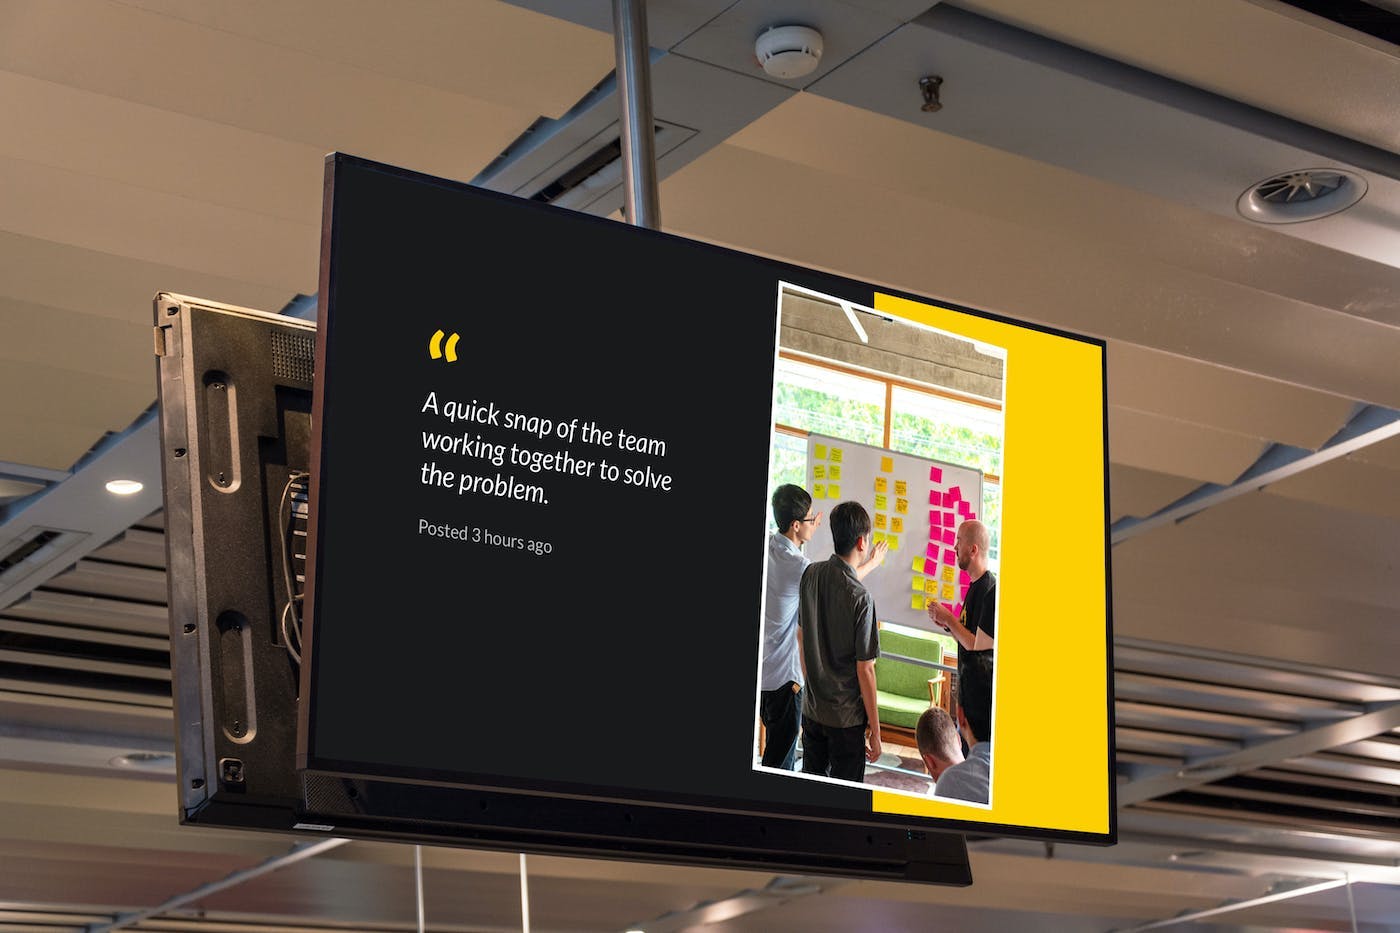 ScreenCloud Article - How Can Business Digital Signage Solve Internal Communication Challenges?